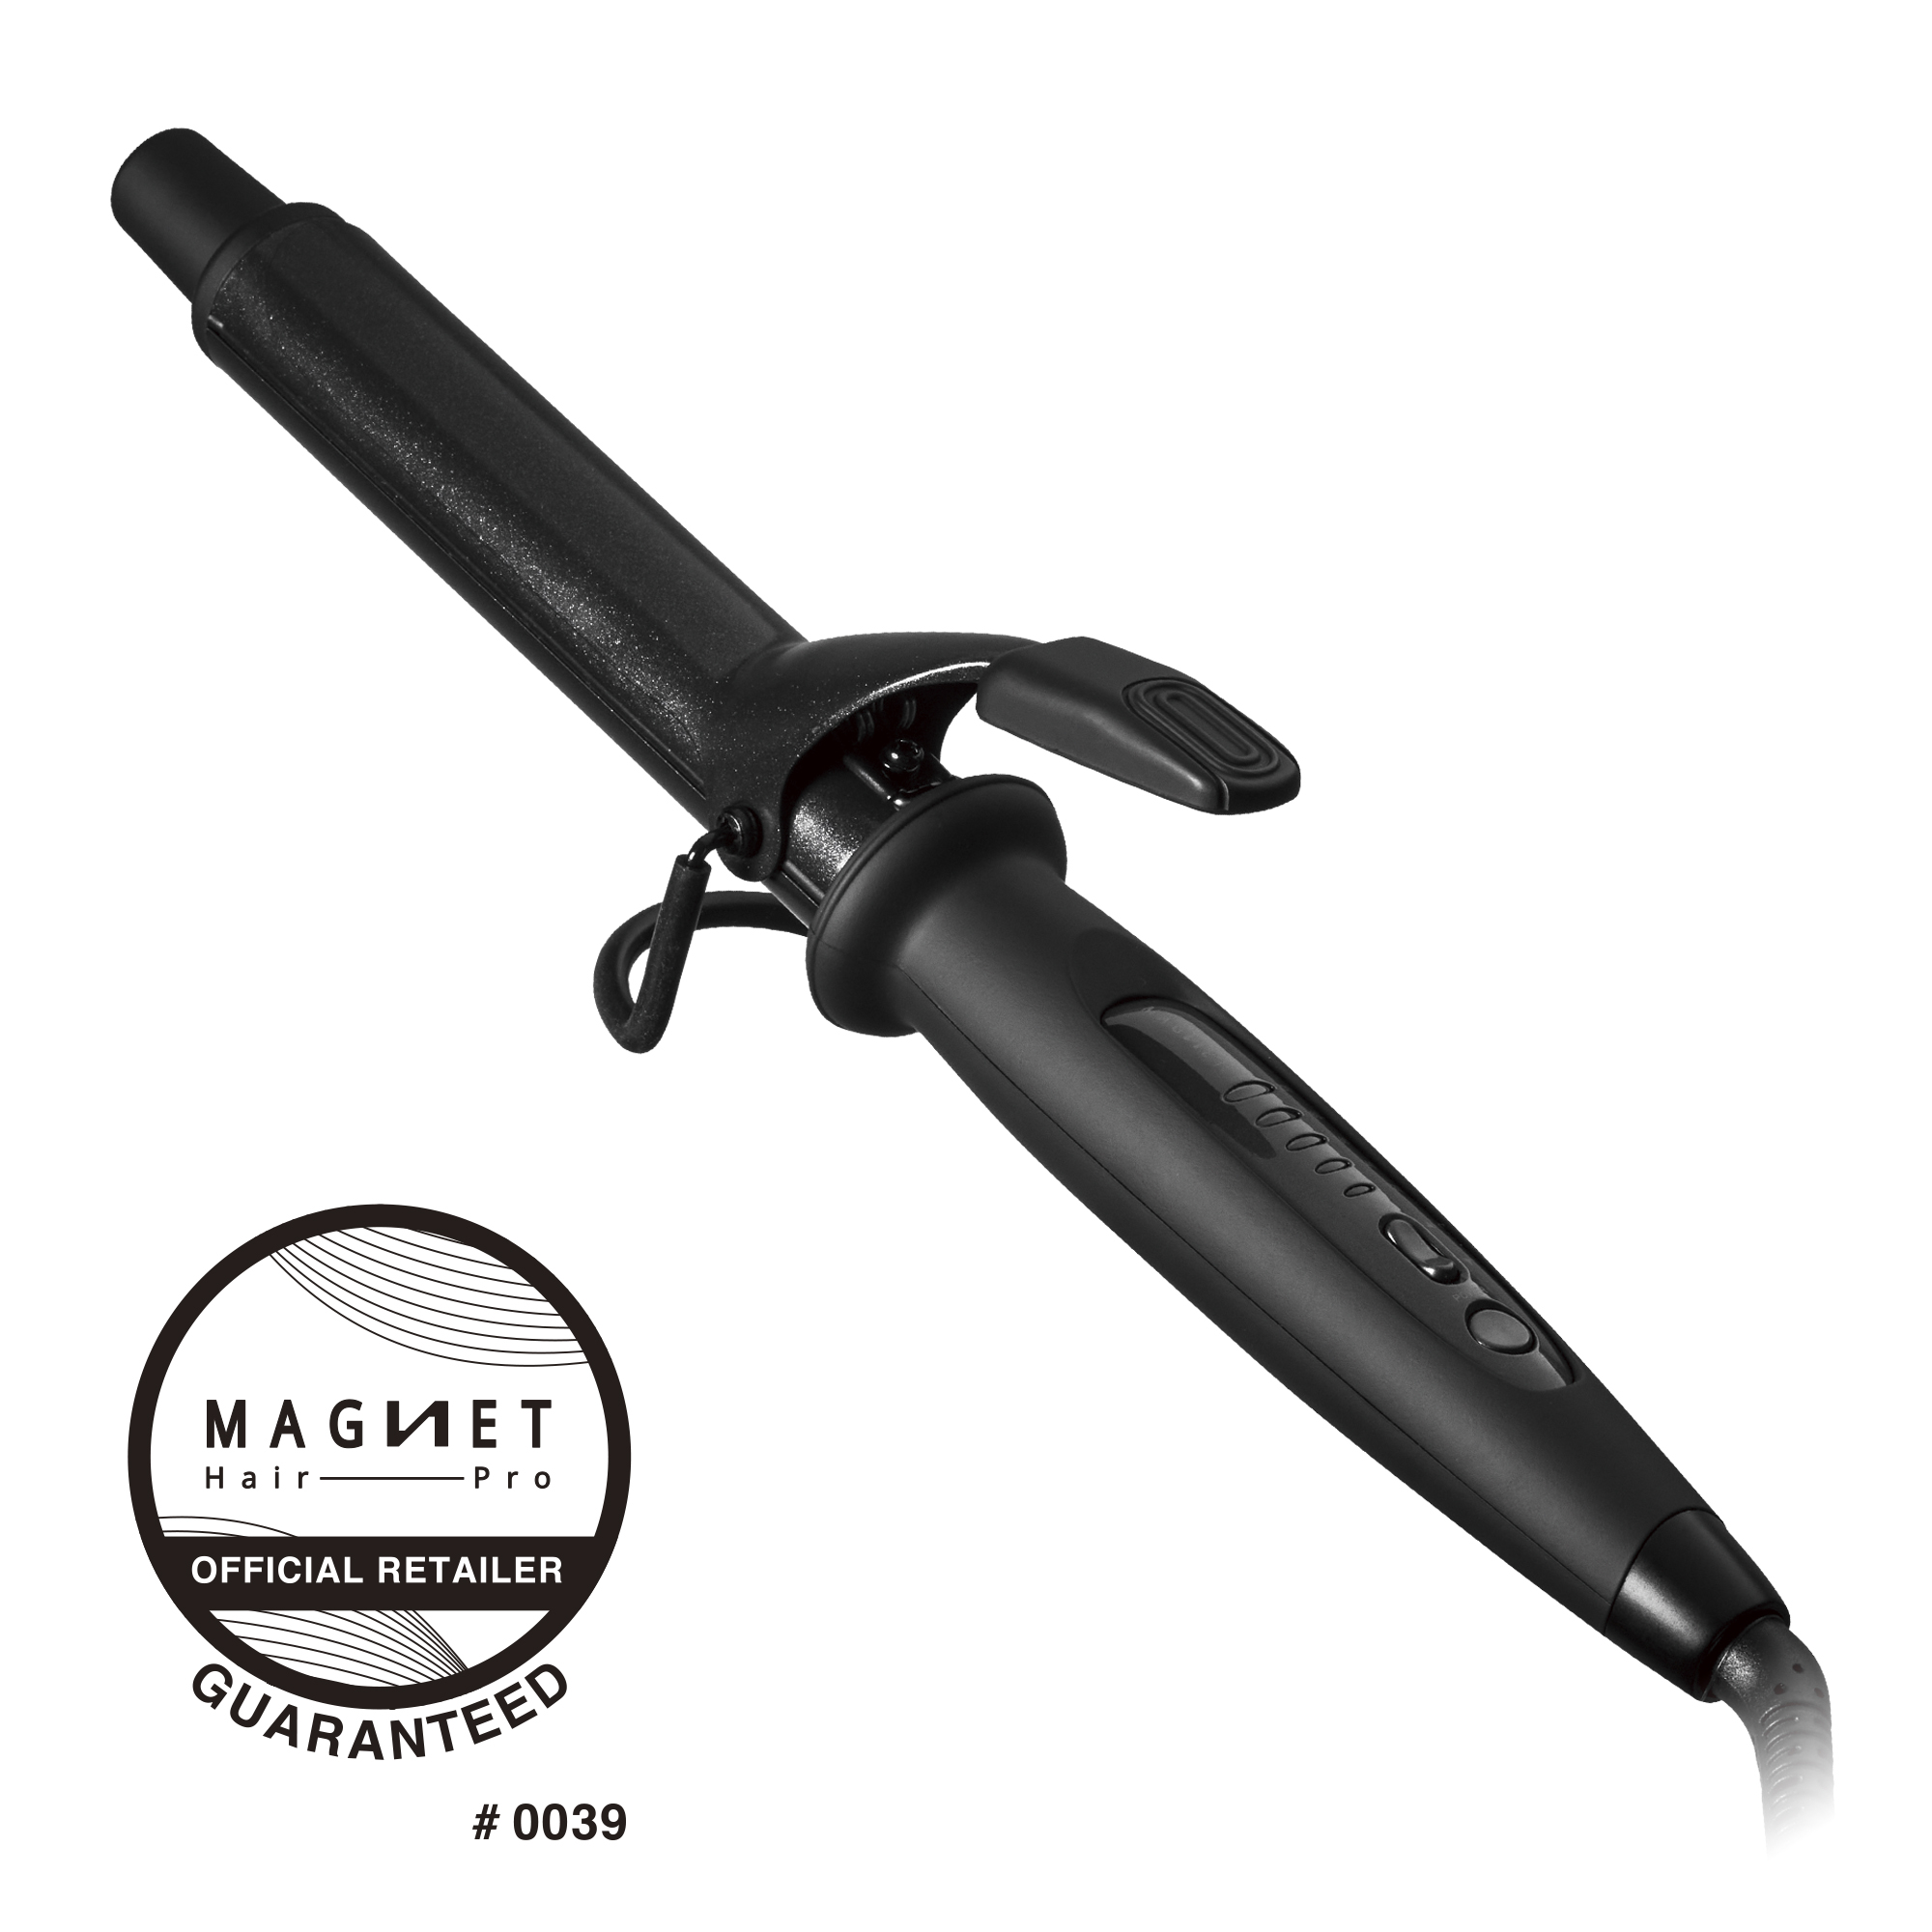 HOLISTIC cures MAGNETHairPro CURL IRON 26mm